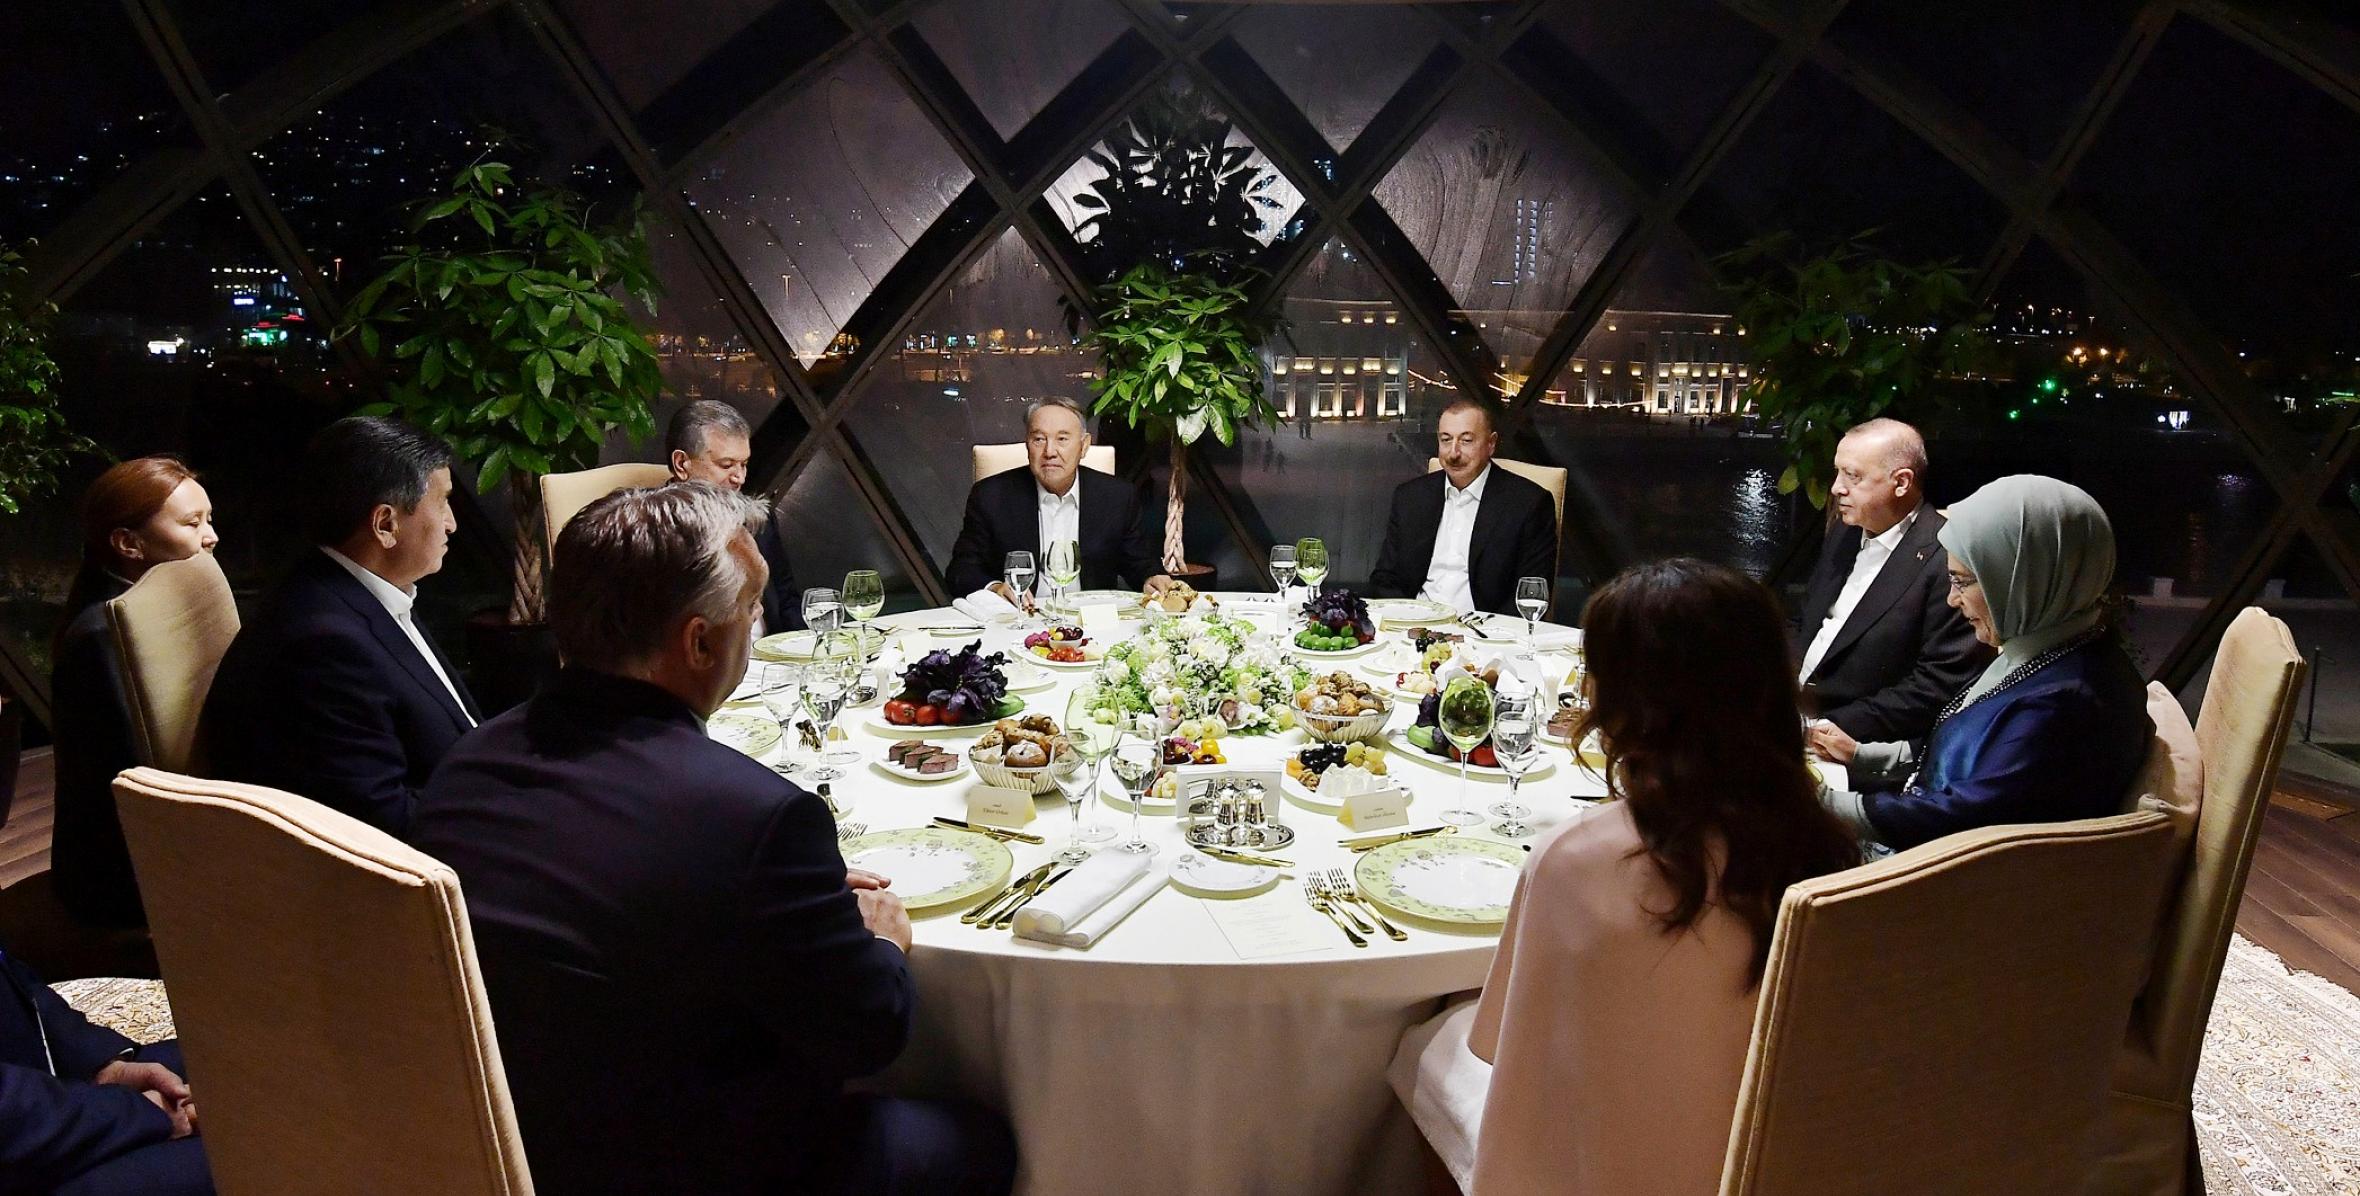 Ilham Aliyev had a joint dinner with heads of state and government who attend the 7th Summit of Turkic Council